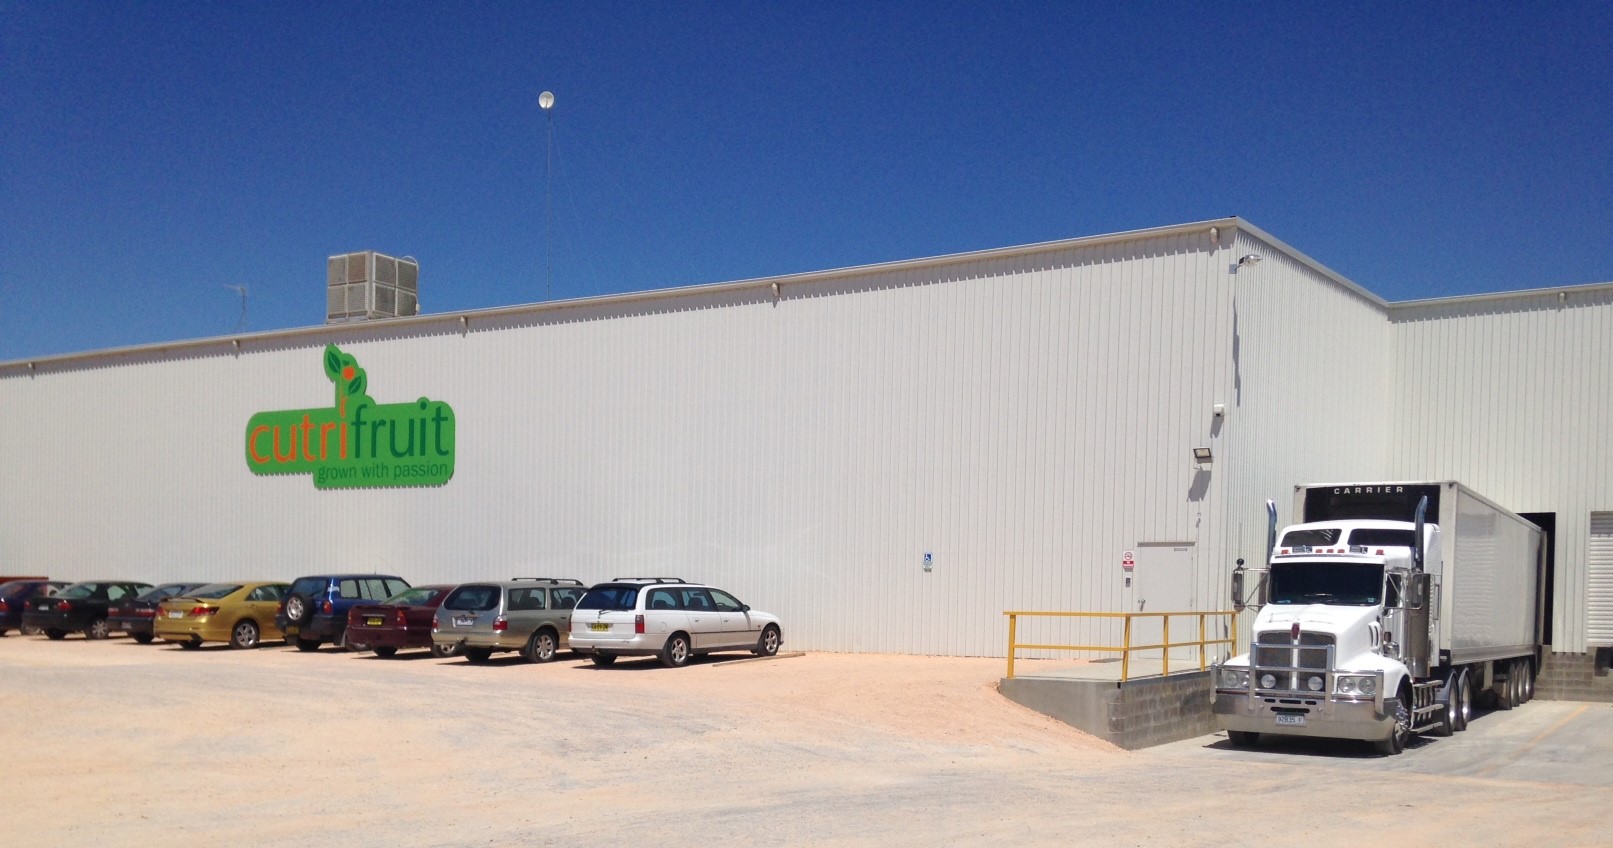 Cutri Fruit Swan Hill Shed and truck